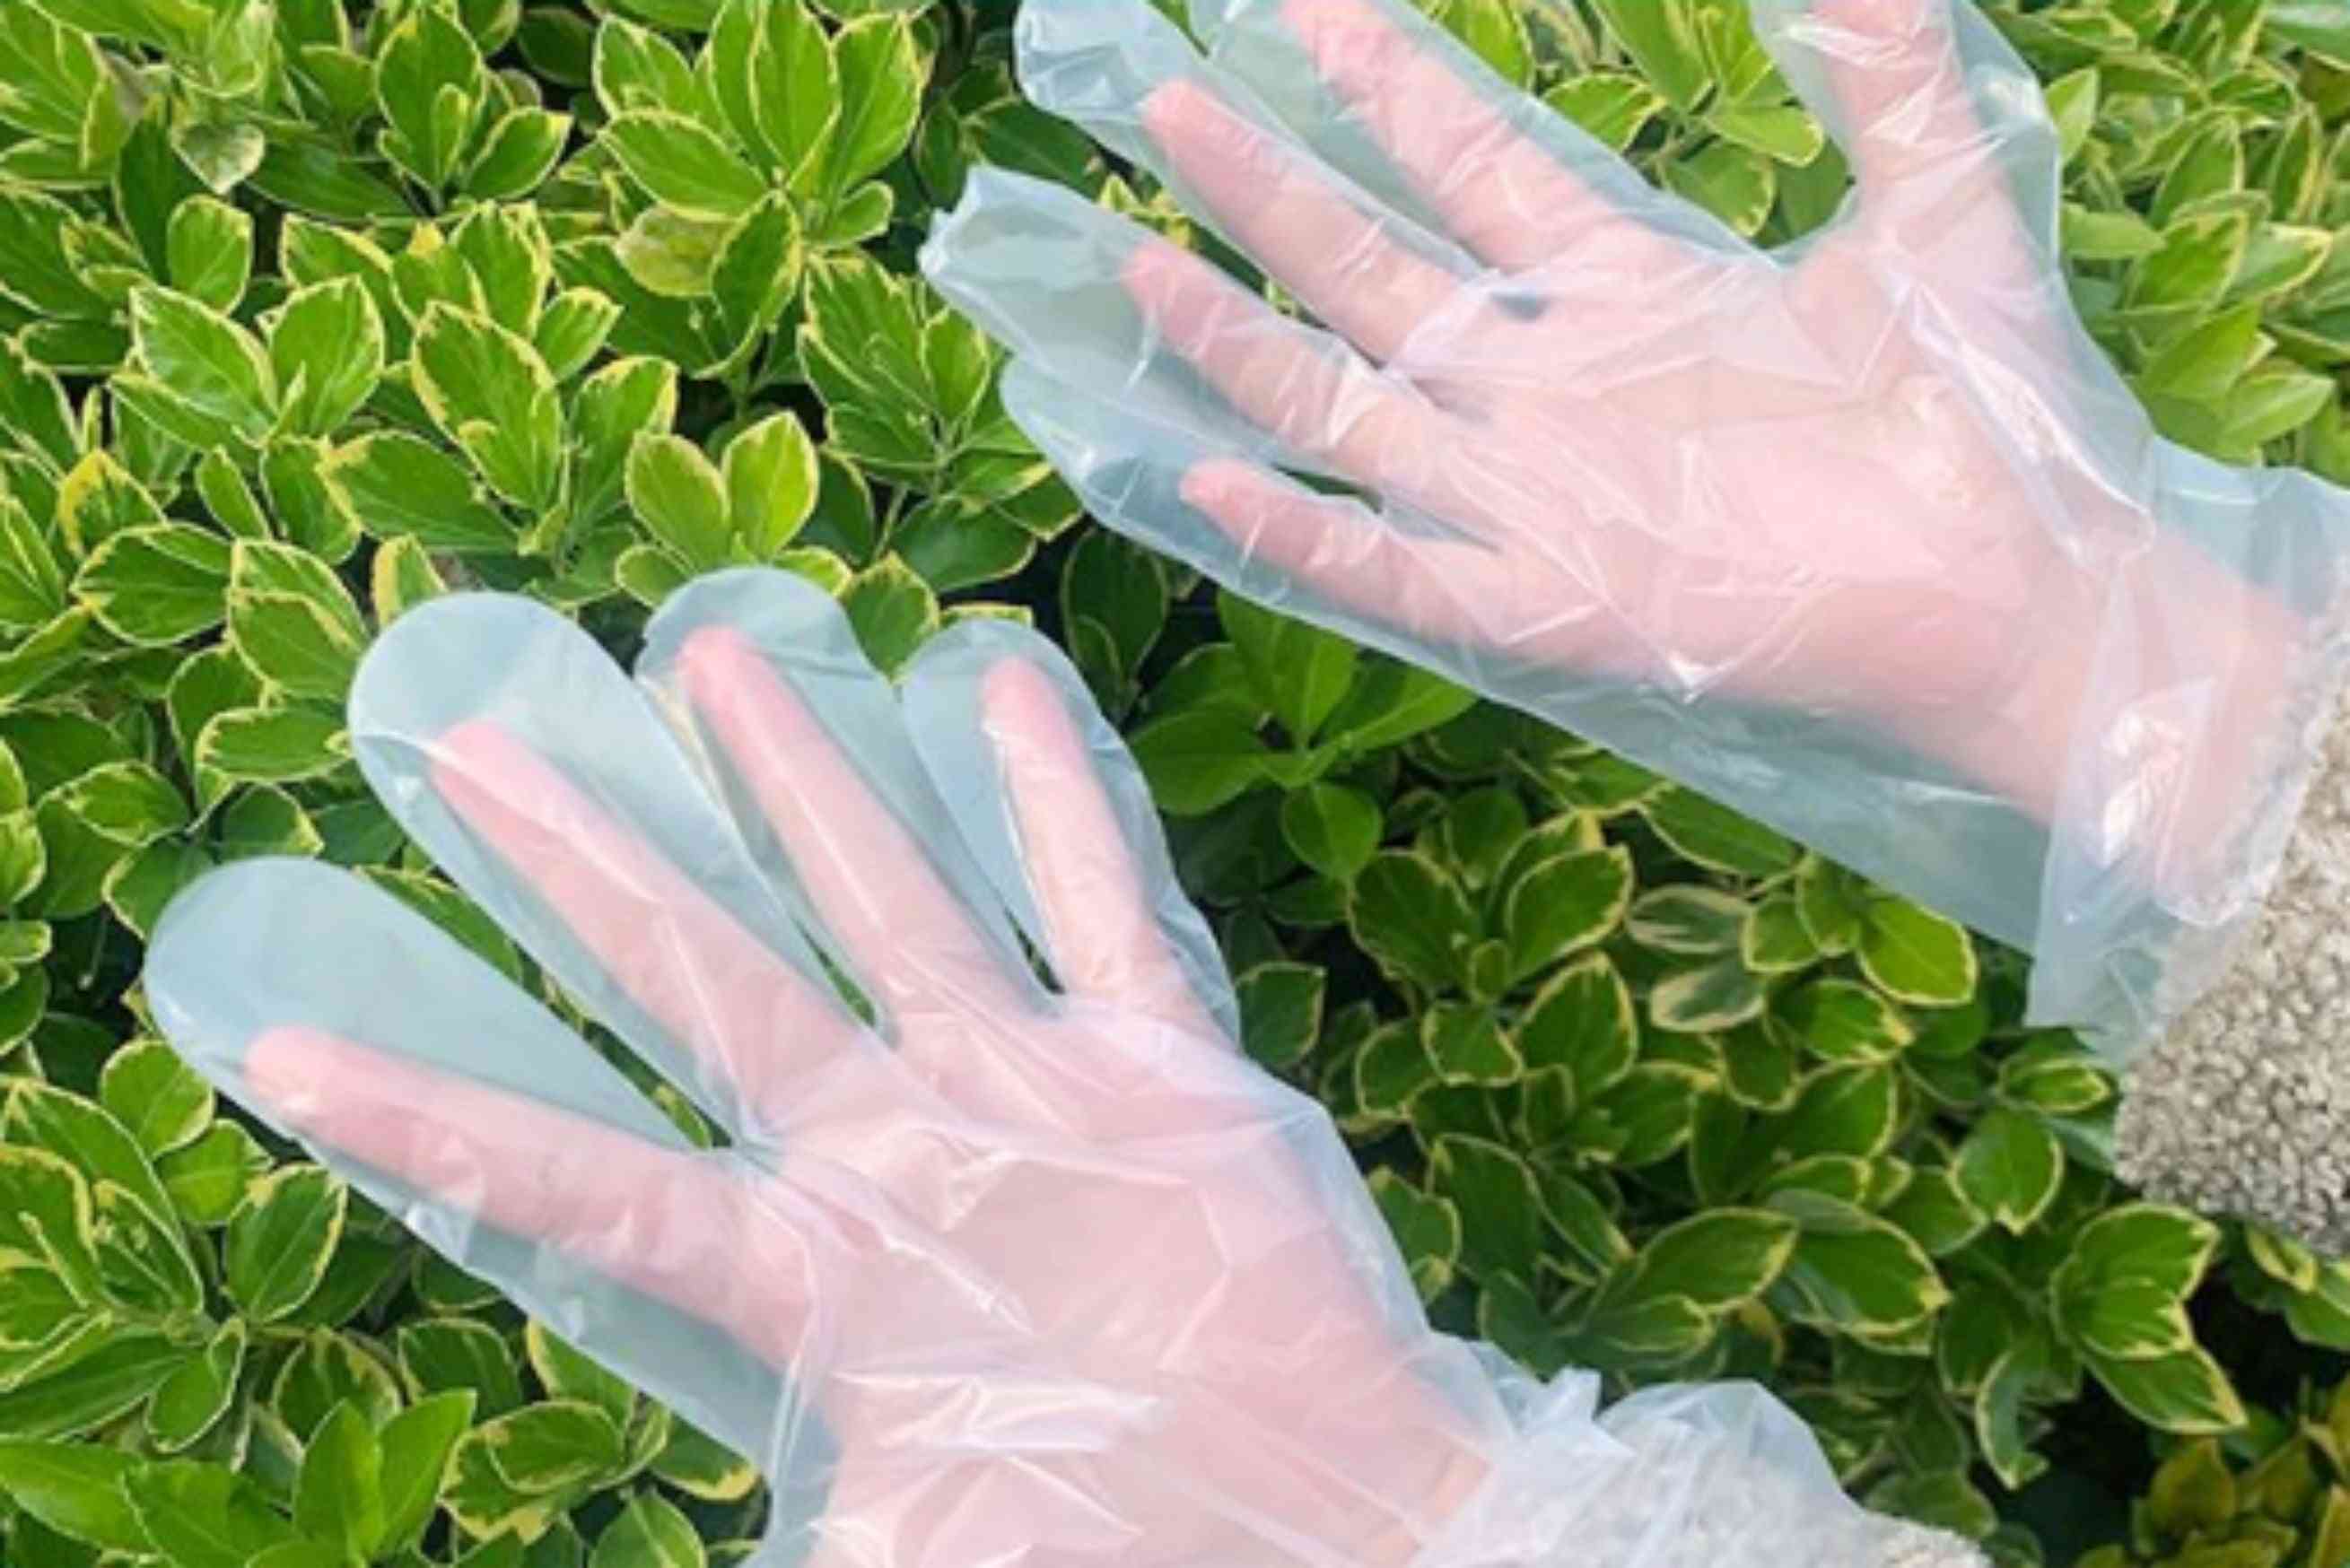 Plastic Clear Disposable Gloves